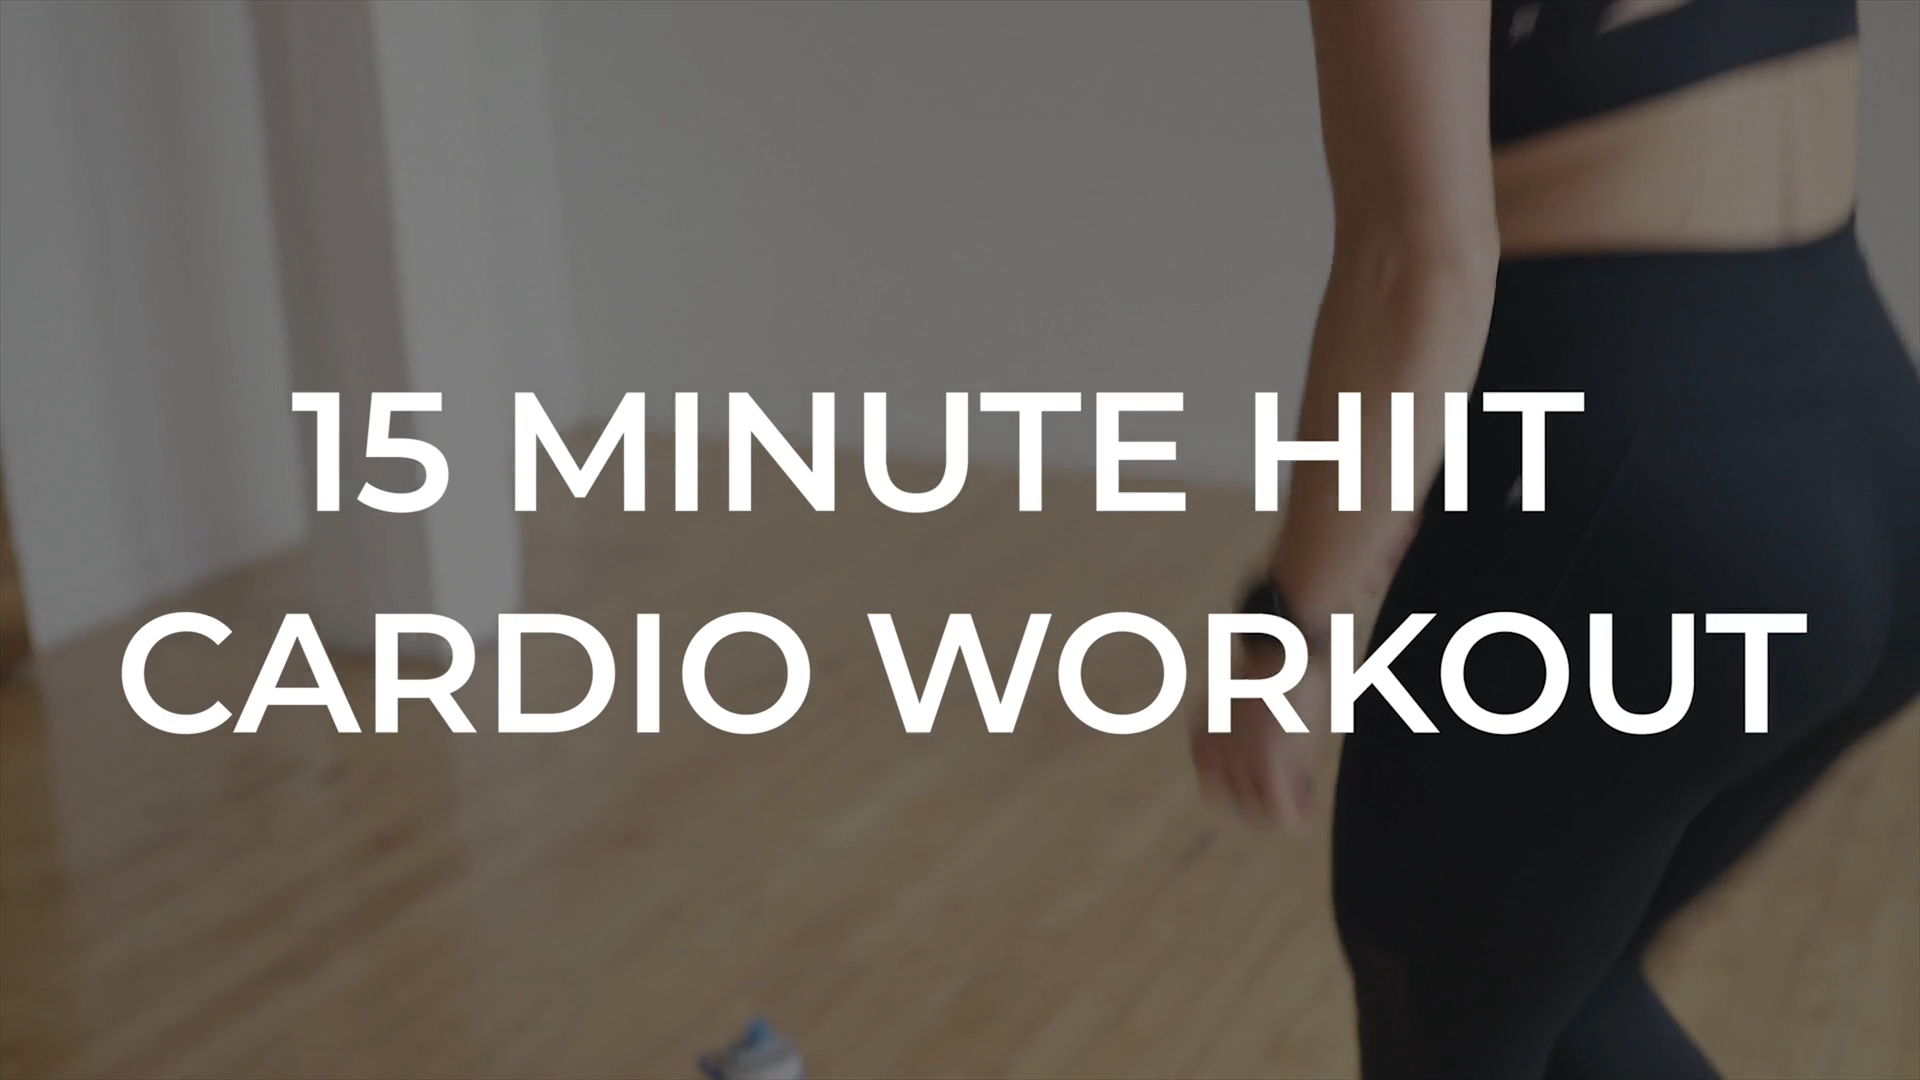 15 Minute HIIT Cardio Workout -   16 fitness Quotes videos ideas